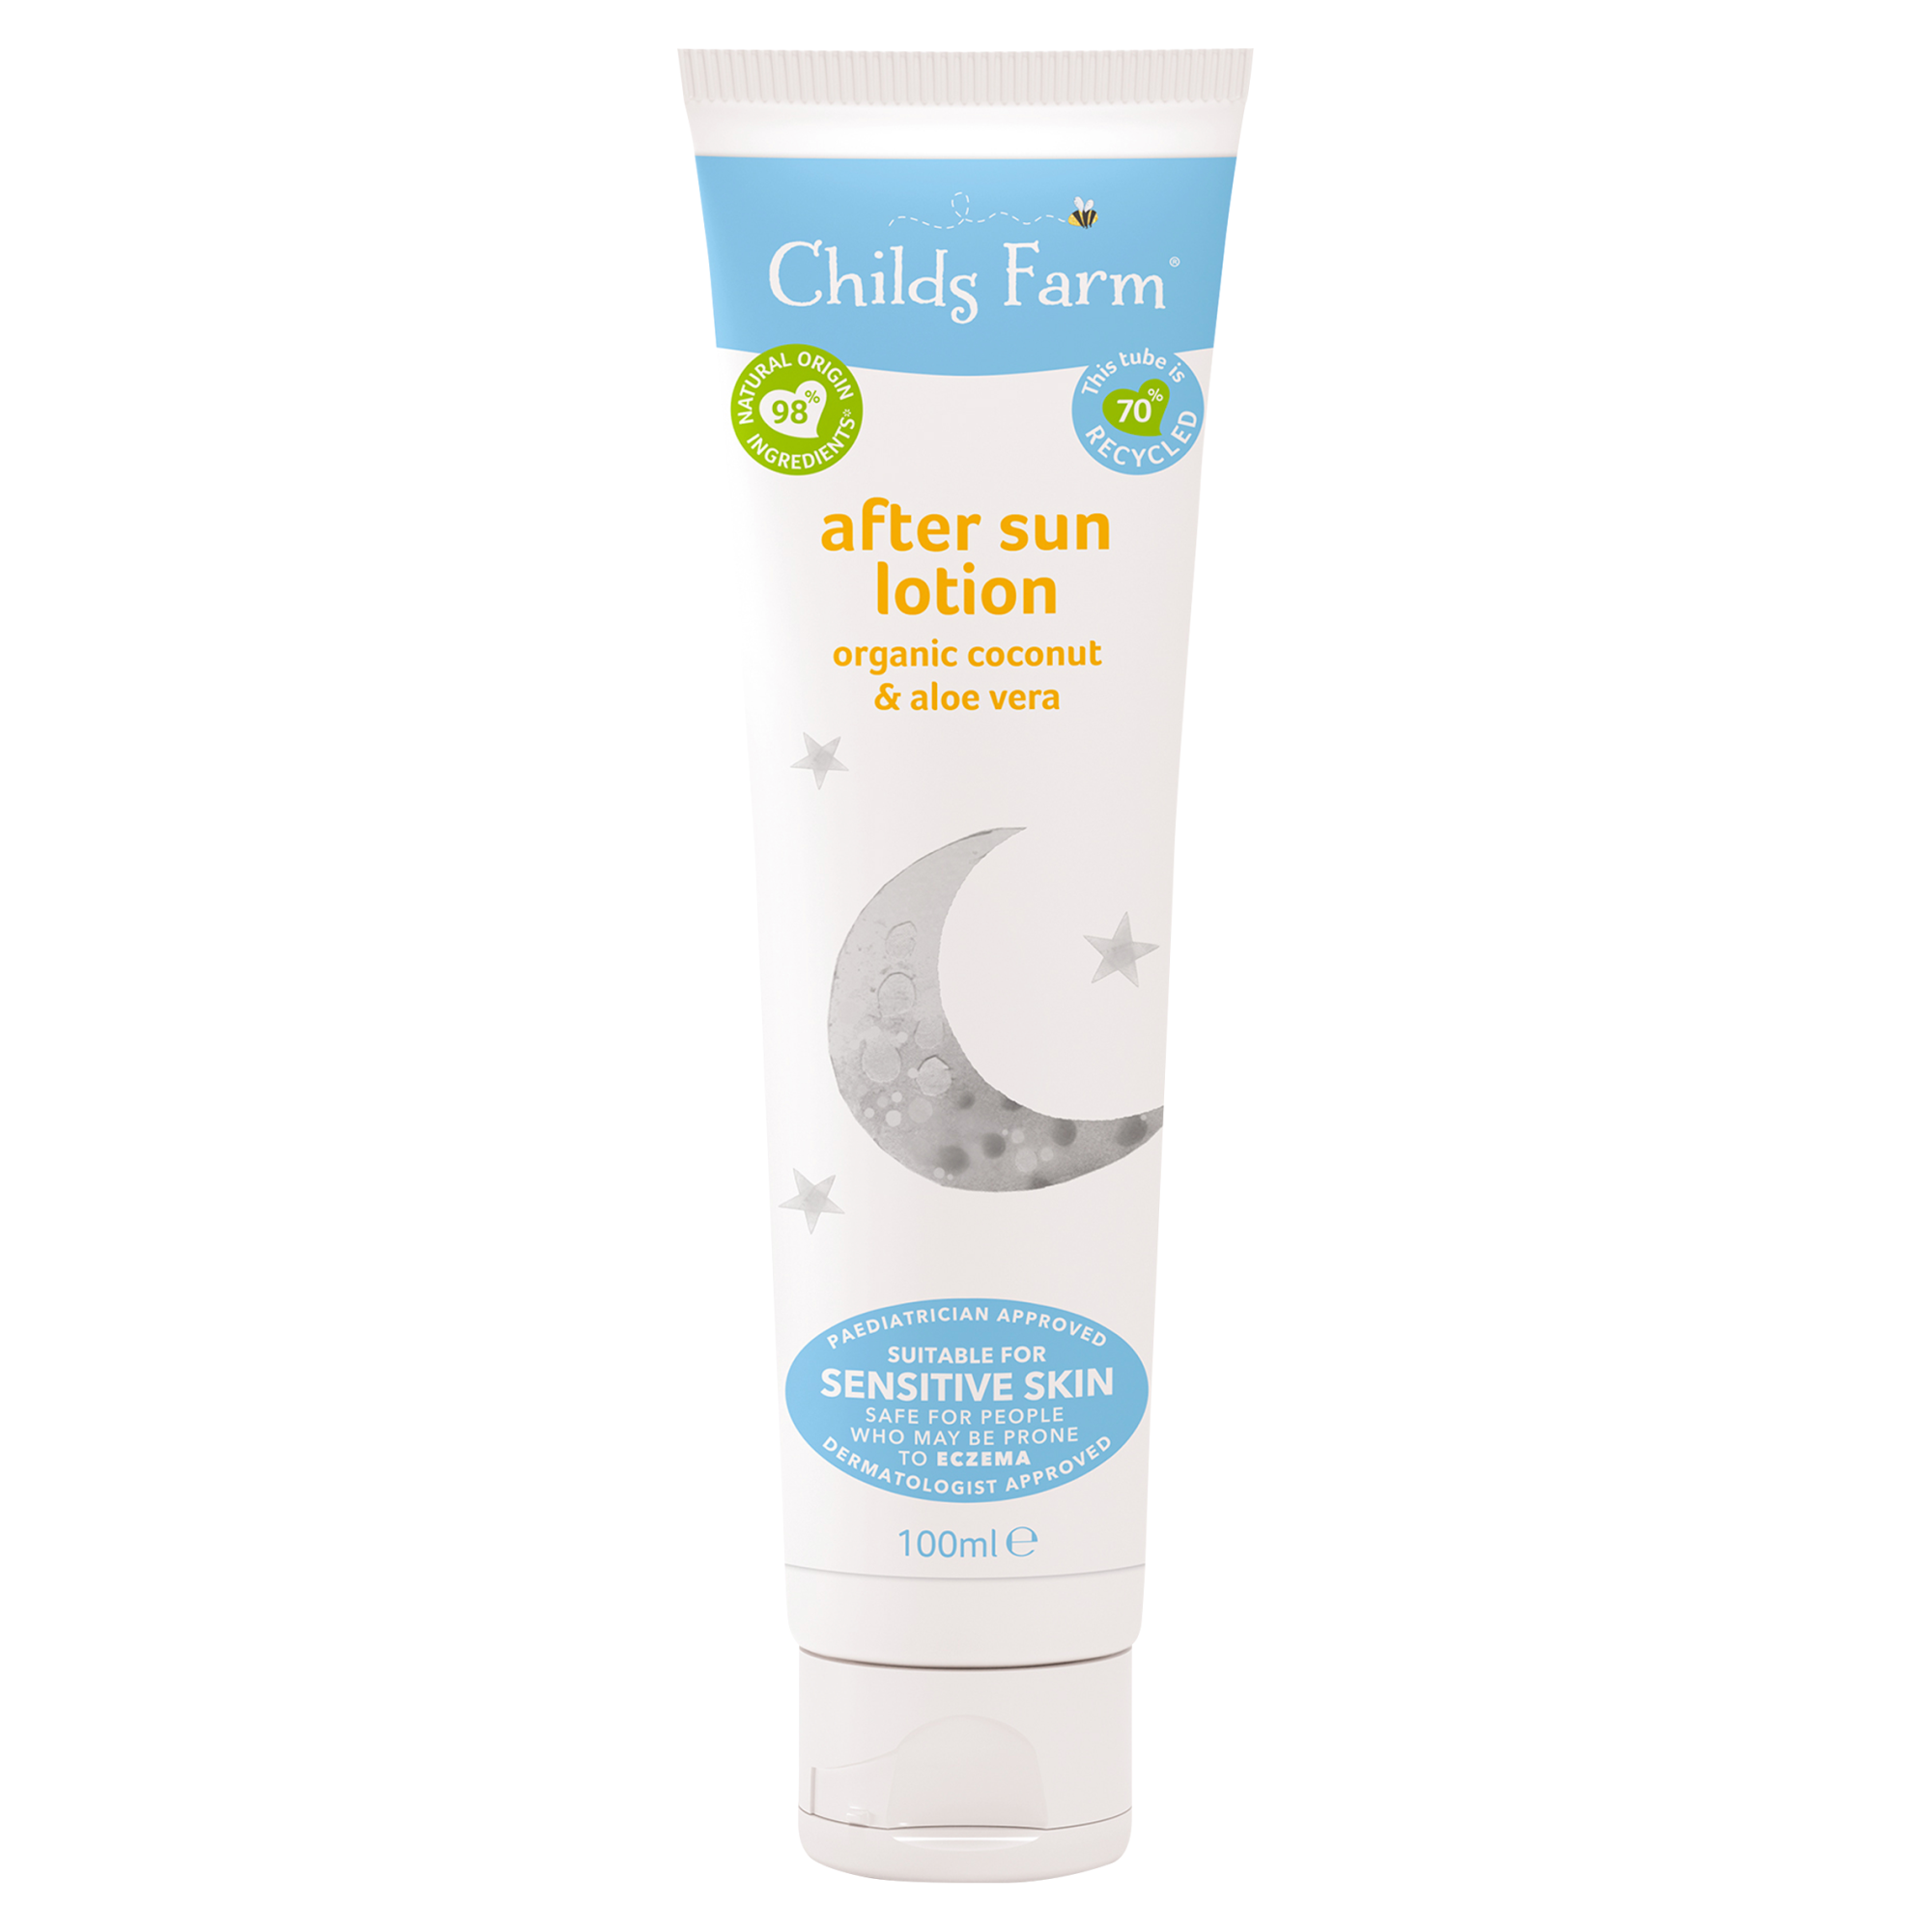 Childs Farm Aftersun Lotion 100ml